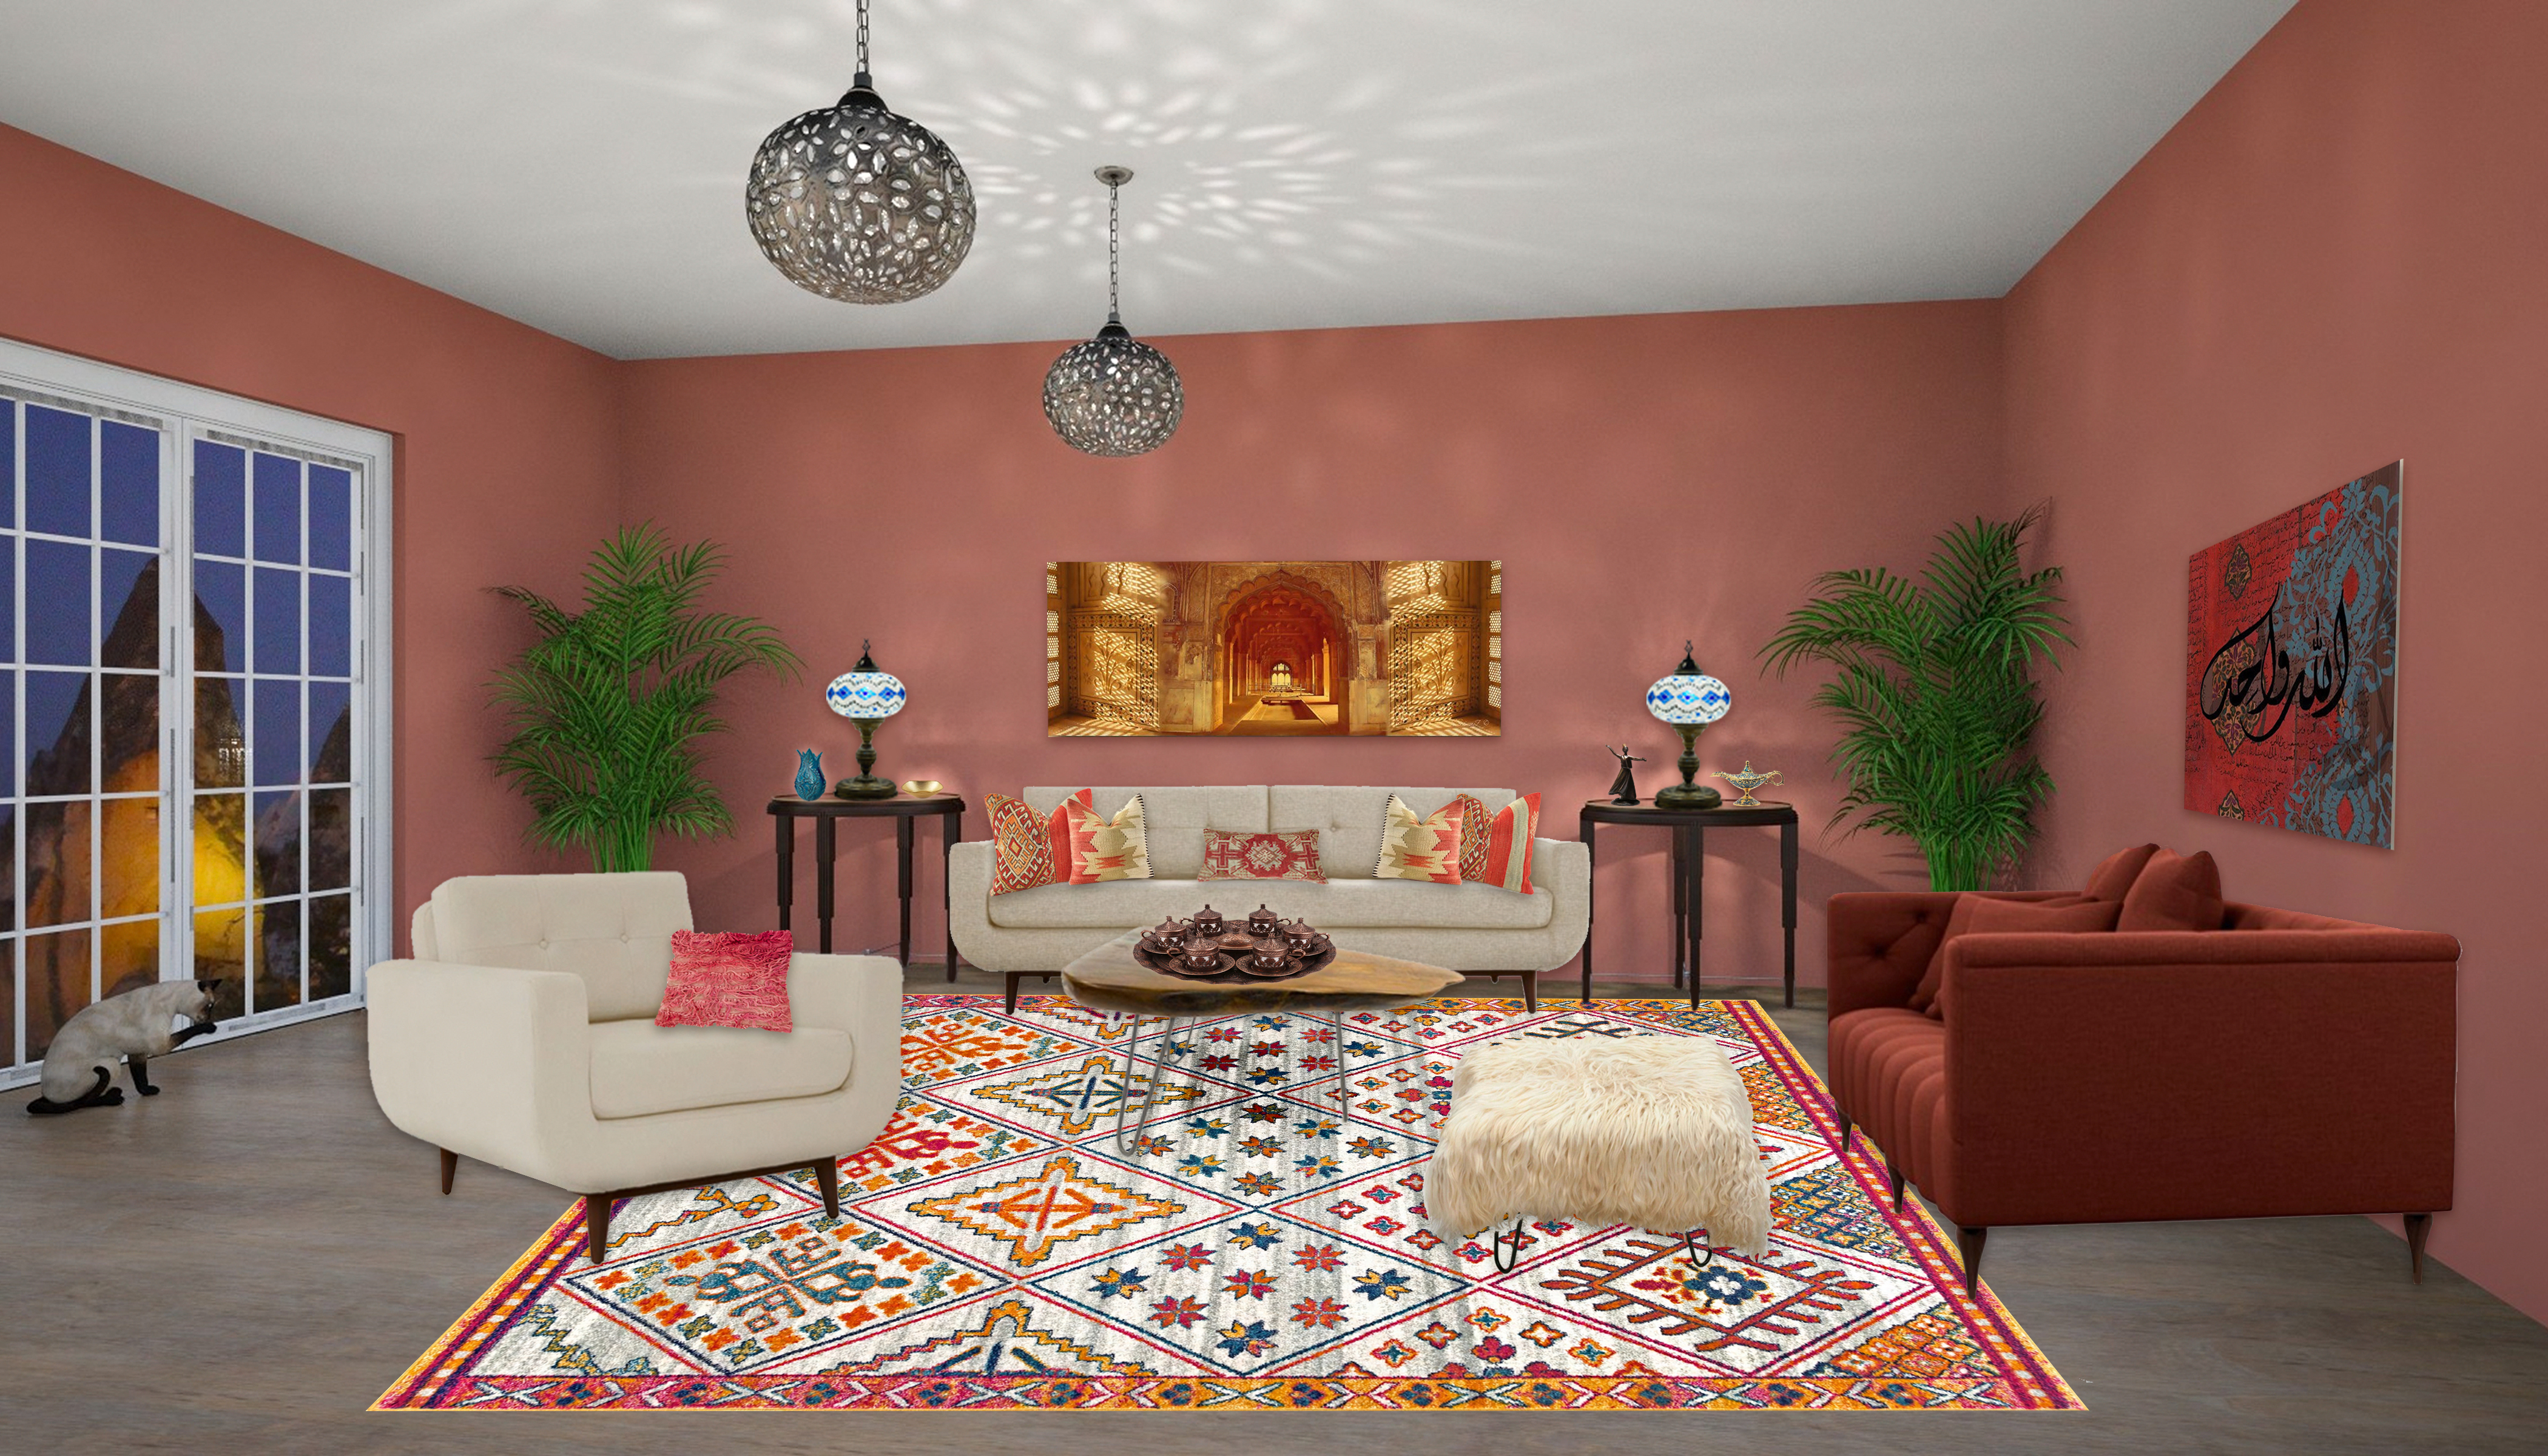 Turkish Style Living Room using Cavern Clay on the walls. EDesign by Mary Ann Benoit, Northern Lights Home Staging and Design. Edesign #color #colorconsulting #Interiordesign #edesign #bohemian #interiordecorating #paint #colors #homestyling #homedecor #homedesign #moderndecor #colorfuldecor #interiordecor #beautifulhomes #homeinspo #decorinspo #homeinspo #decorating #interiorstyle #homestyle #colorstrategy #colorconsultant #interiorpaintcolors #exteriorpaintcolors #paintingtips #colortips #interiorcolor #colorfuldecor #bohemian #global #99664